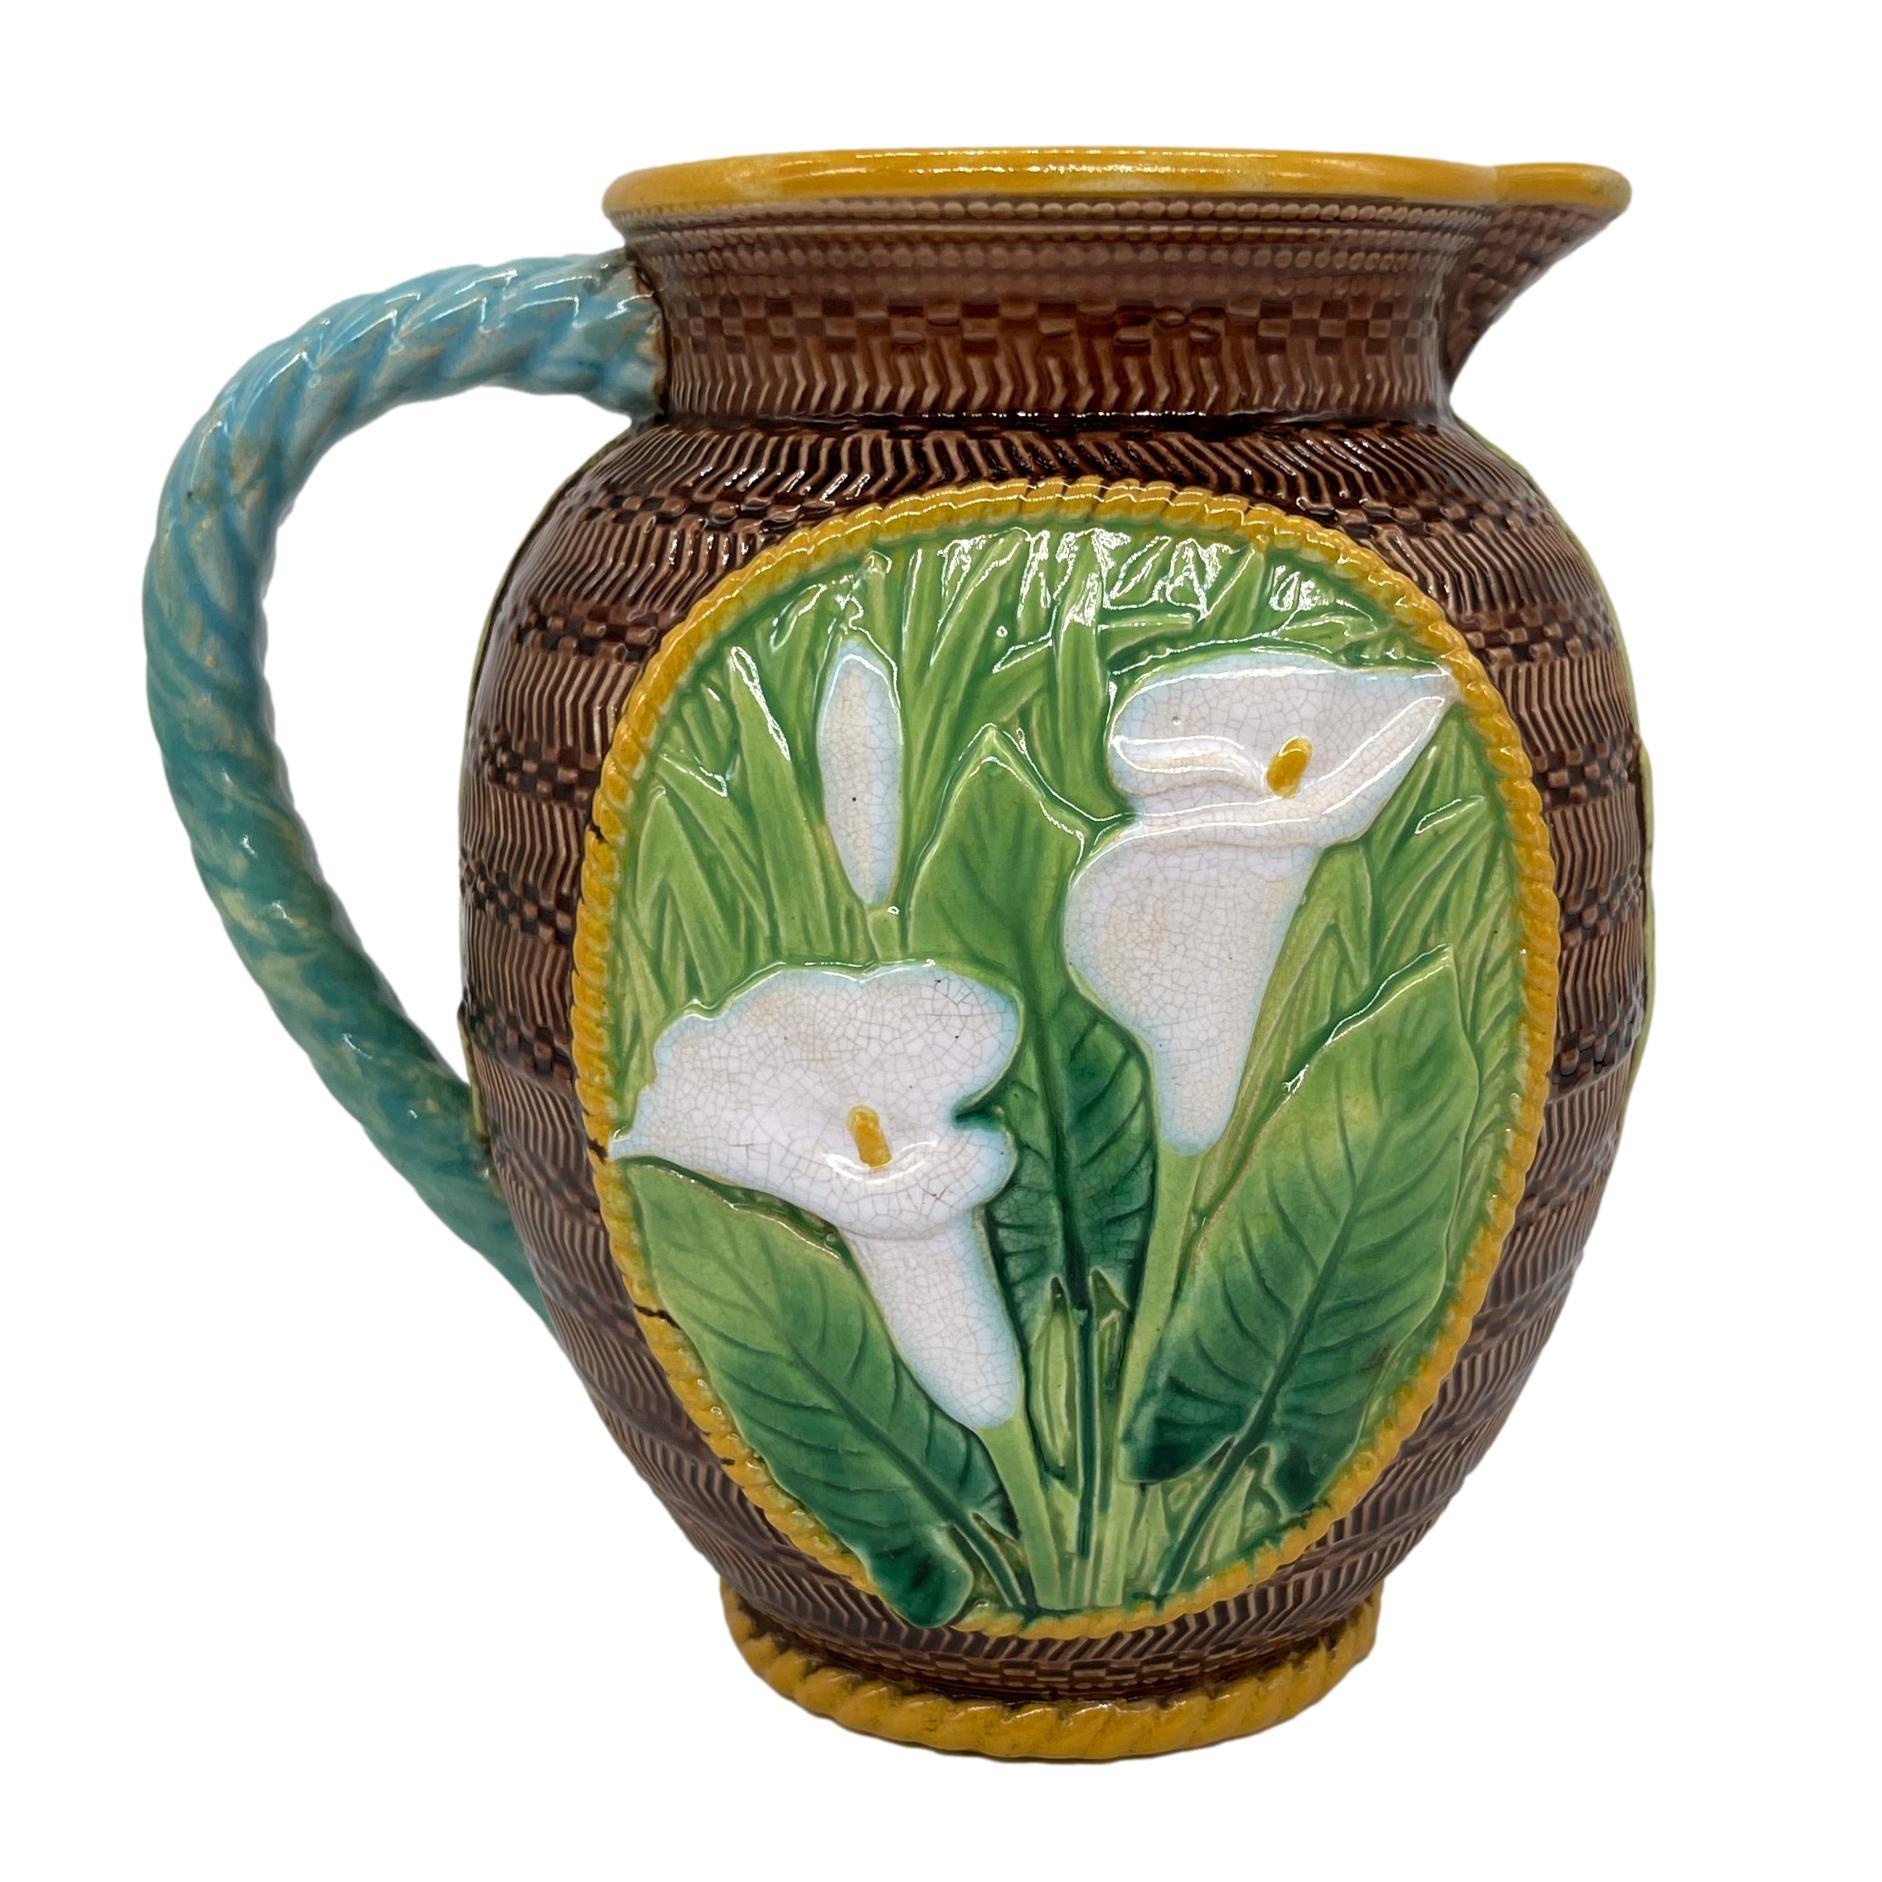 George Jones majolica pitcher with relief molded calla lilies and leaves in panels to either side, with yellow glazed cable borders and rope handle, the body decorated with engine-turned concentric, geometric bands and beading, the interior glazed